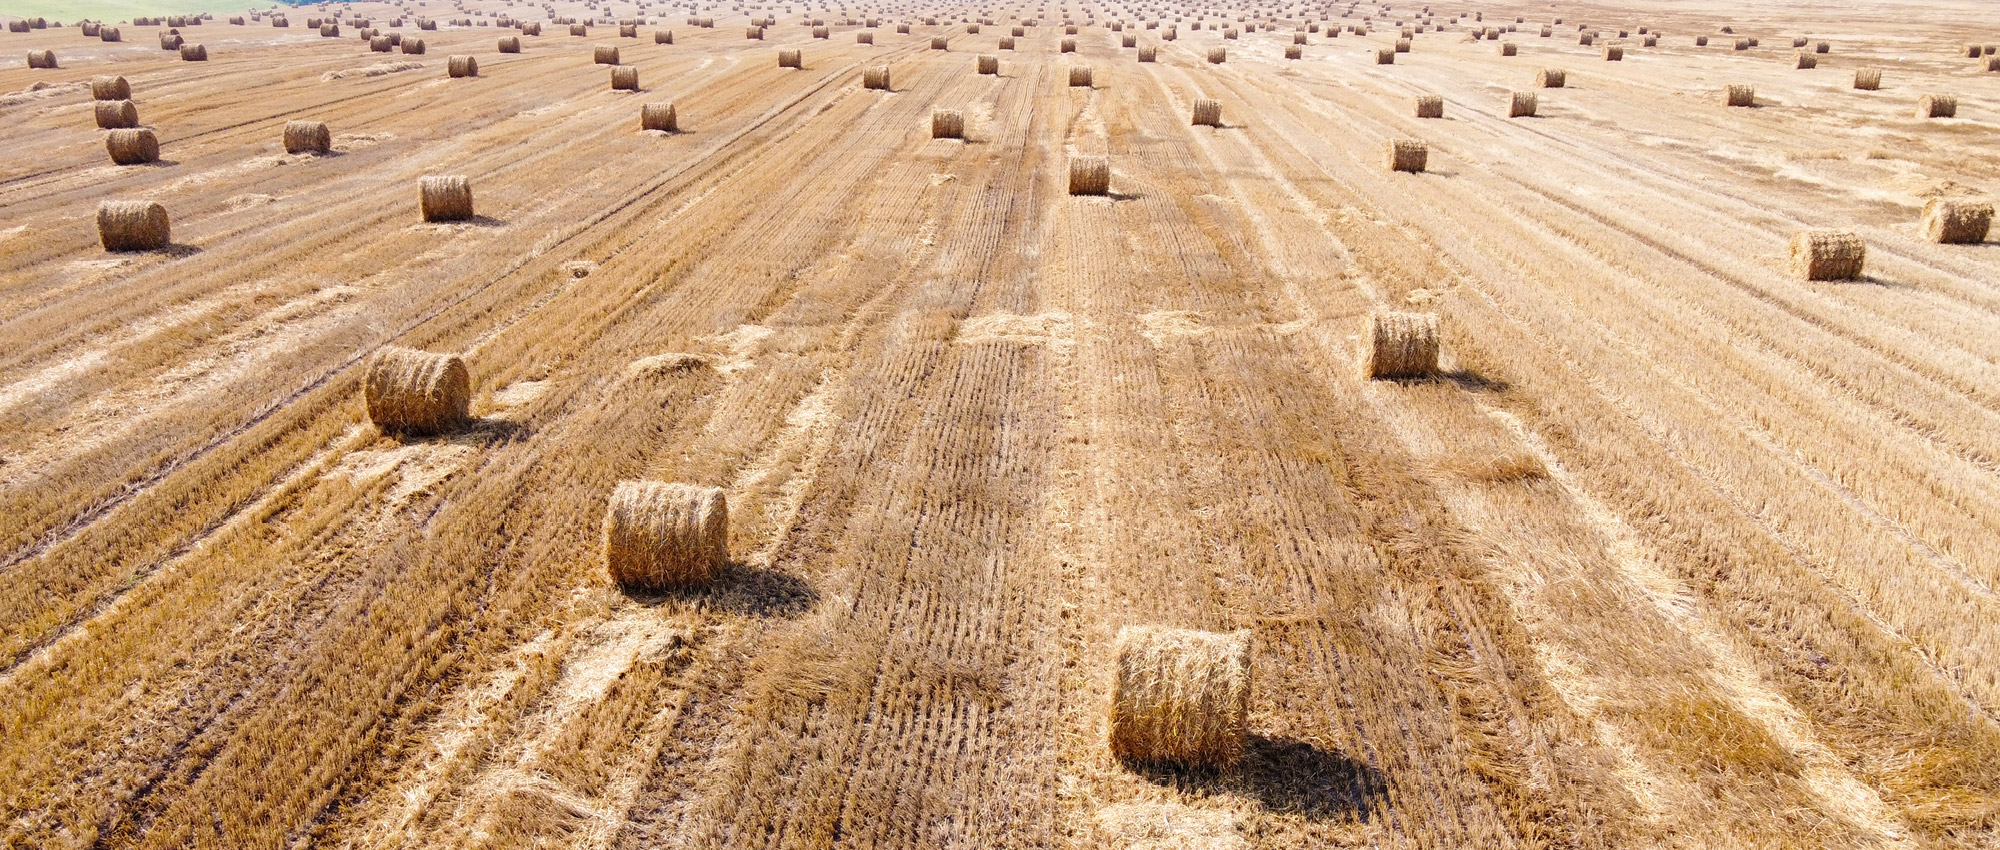 Aerial view of hay bales in a field